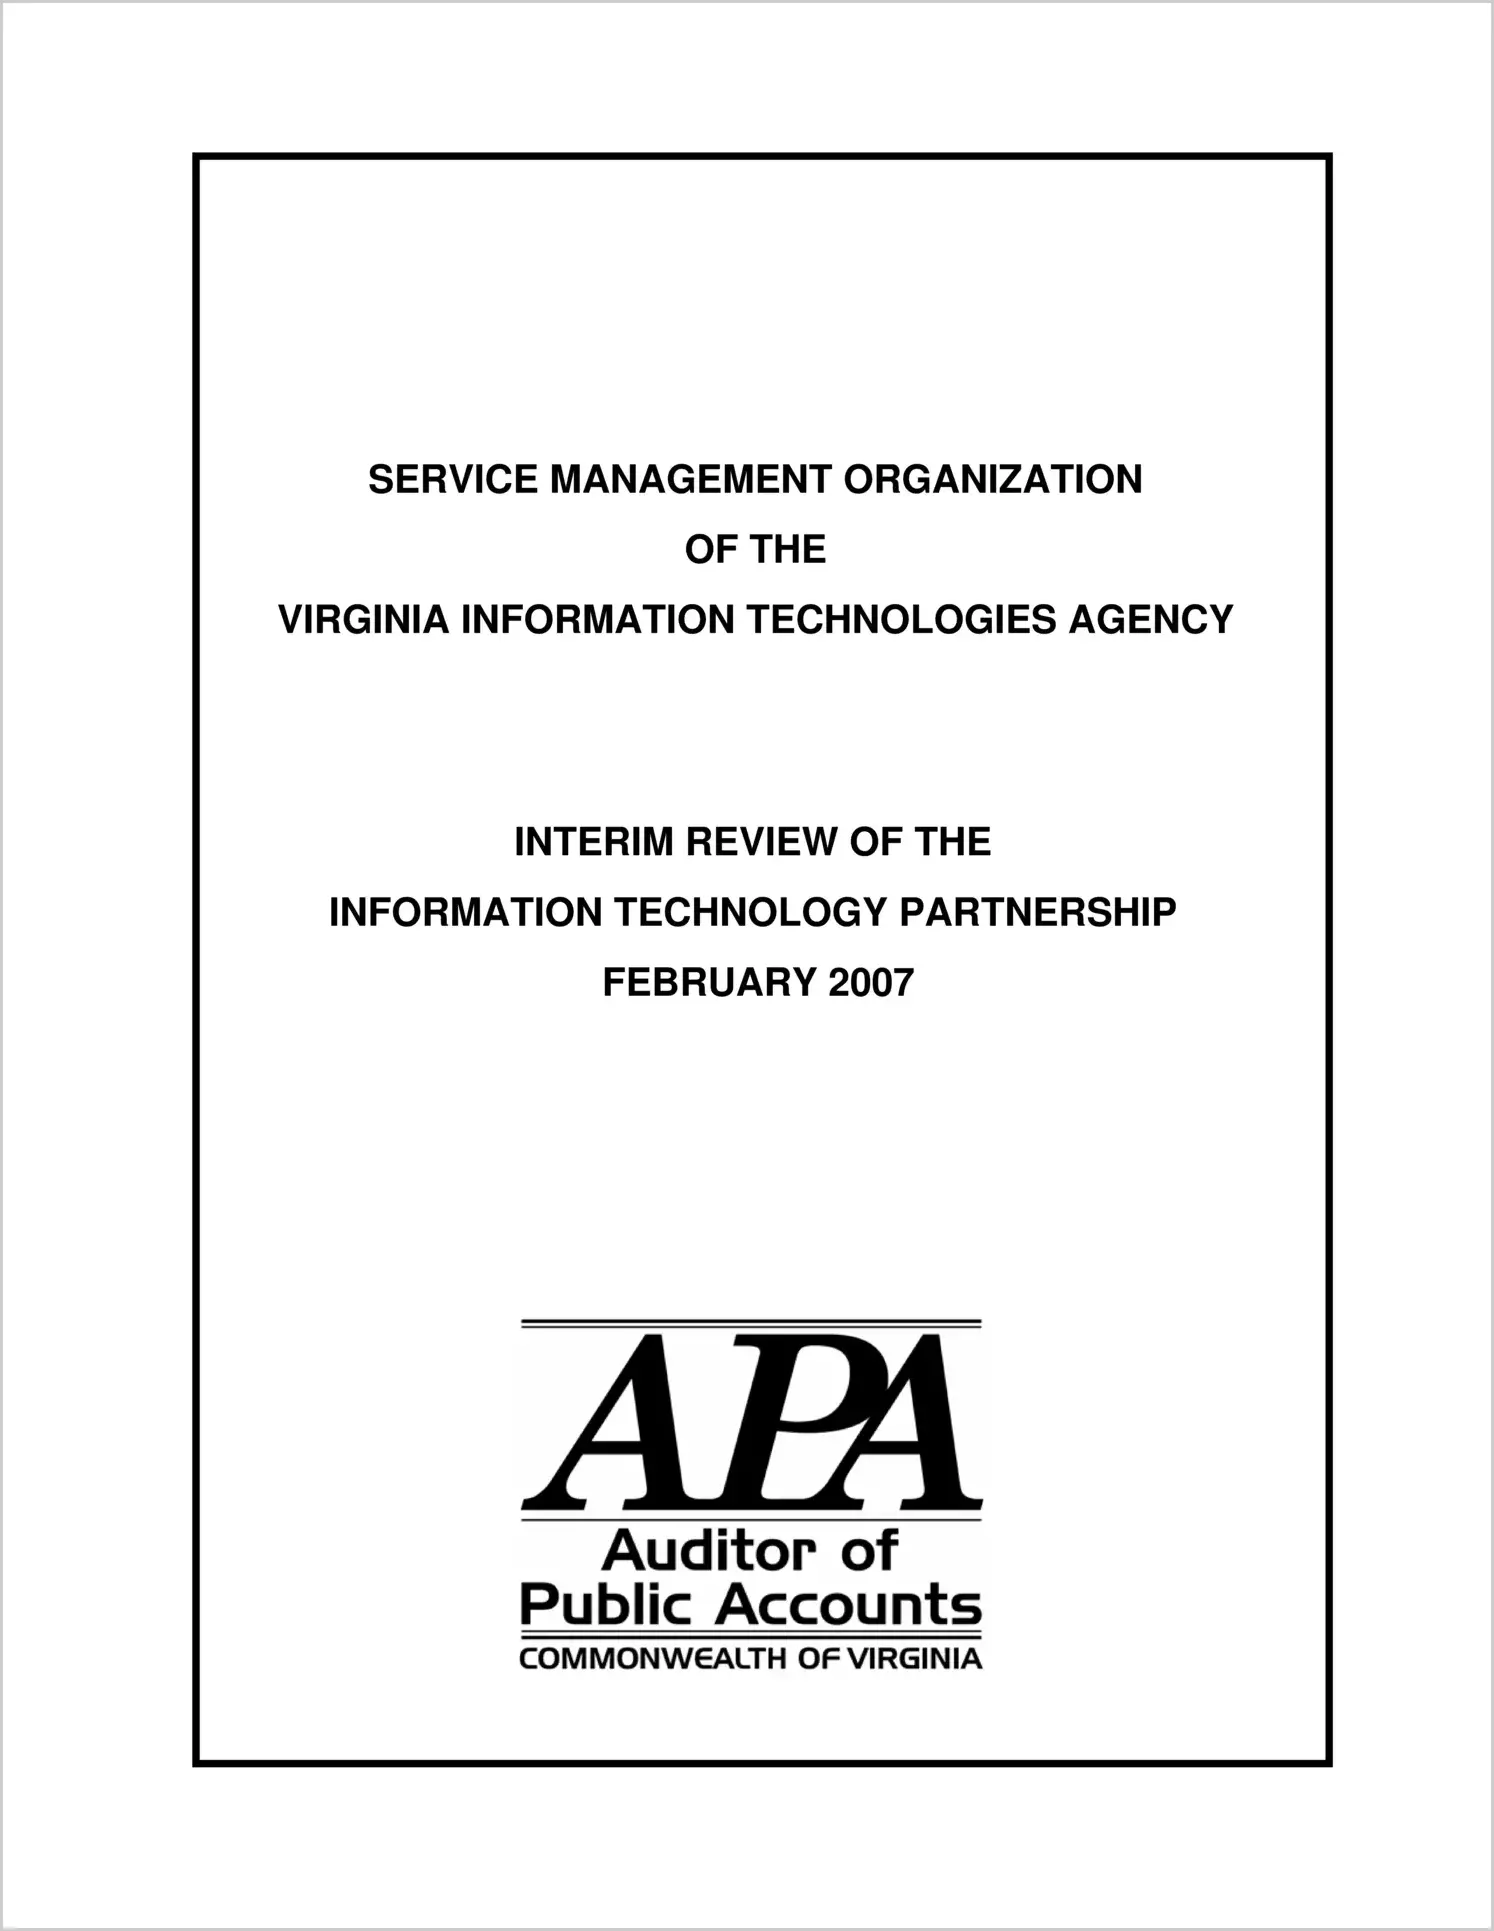 Service Management Organization of the Virginia Information Technologies Agency Interim Review of the Information Technology Partnership February 2007